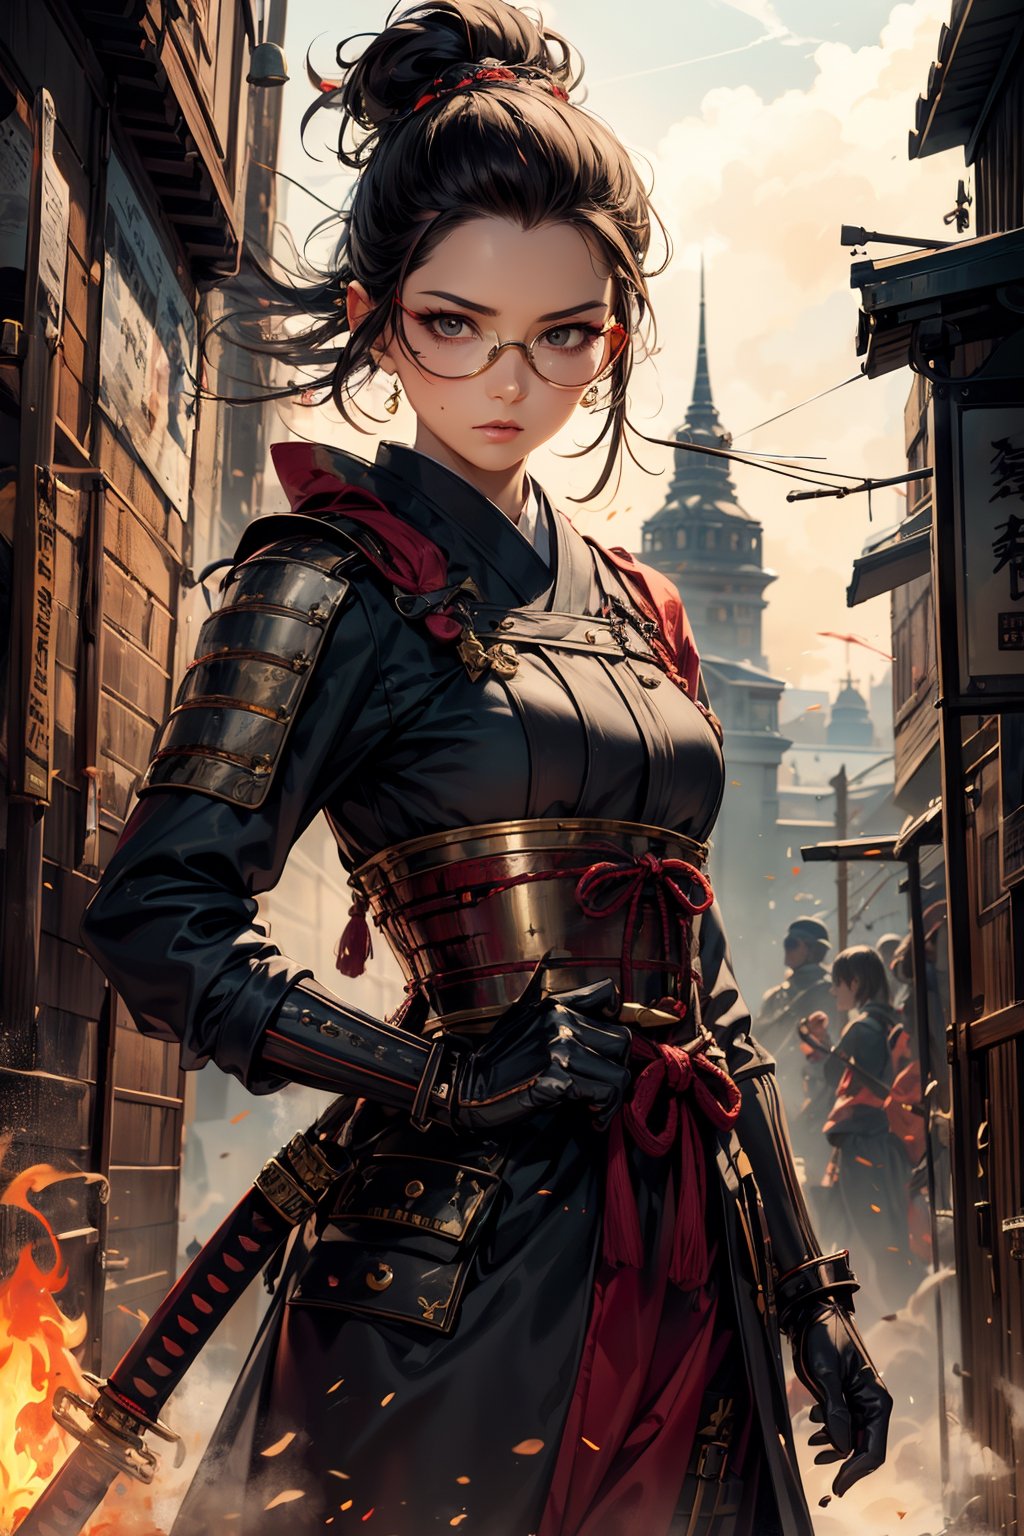 Picture a world where the mystique of ancient ninjas converges with the mechanical marvels of steampunk ingenuity. In this captivating realm, amidst shadowy alleyways and towering pagodas adorned with gears and brass fixtures, emerges a striking figure: a kunoichi. Envision her clad in a sleek yet functional ensemble, blending traditional ninja garb with steampunk accents such as leather corsets adorned with brass upper body, buckles and goggles that gleam with the soft glow of augmented lenses. Her katana, intricately engraved with steam-powered motifs, rests at her side, a testament to her deadly skills in both combat and engineering. With a grace honed through years of rigorous training, she moves with silent precision, her every step a dance of lethal elegance. Behind her, the cityscape pulses with the rhythmic hum of steam engines and the flickering glow of gas lamps, underscoring the seamless fusion of ancient tradition and futuristic innovation in this captivating world.